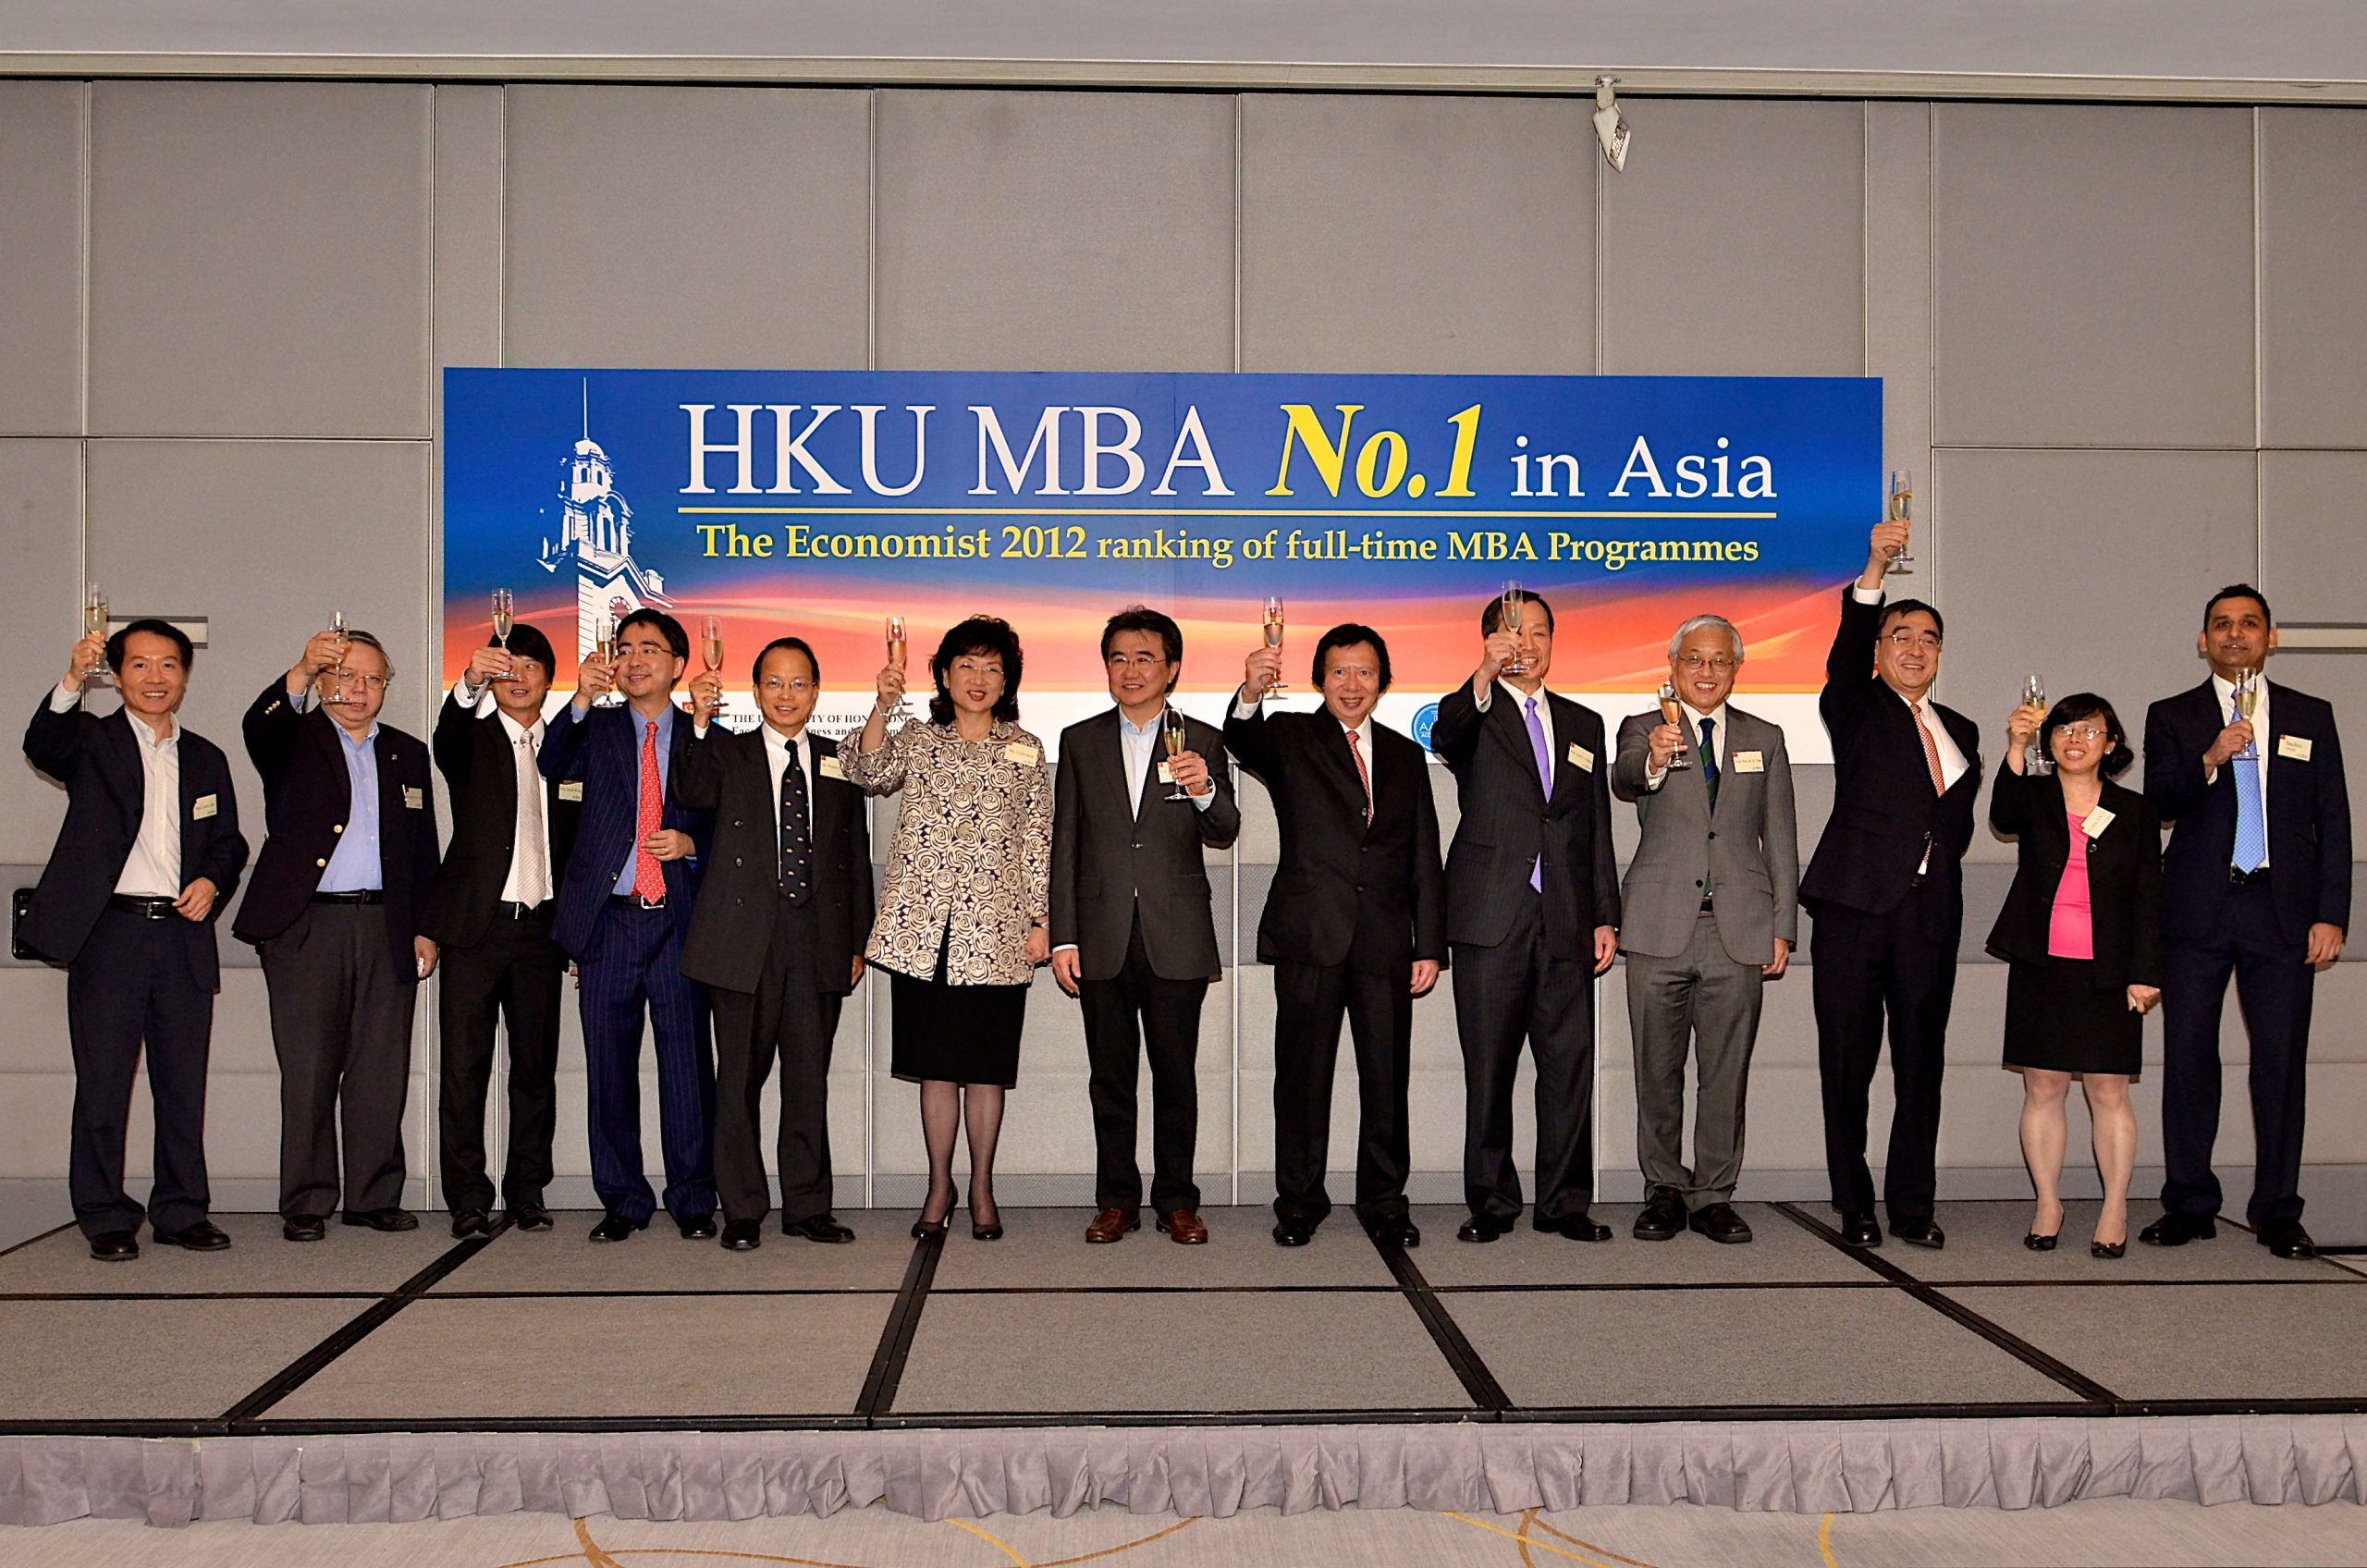 MBA ranked No. 1 in Asia (The Economist)